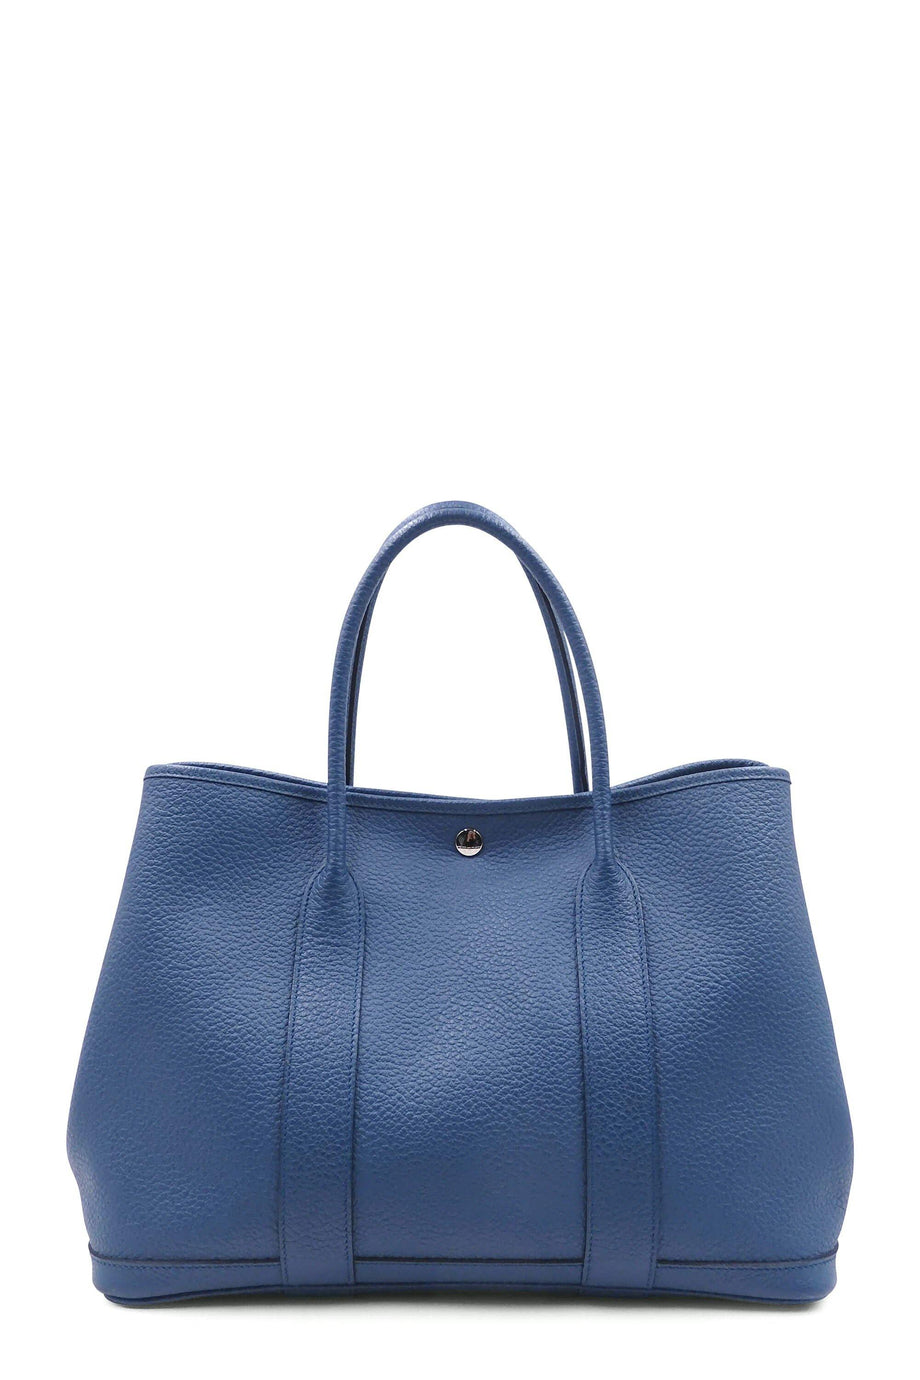 Buy Authentic, Preloved Hermes Garden Party 36 Blue Bags from